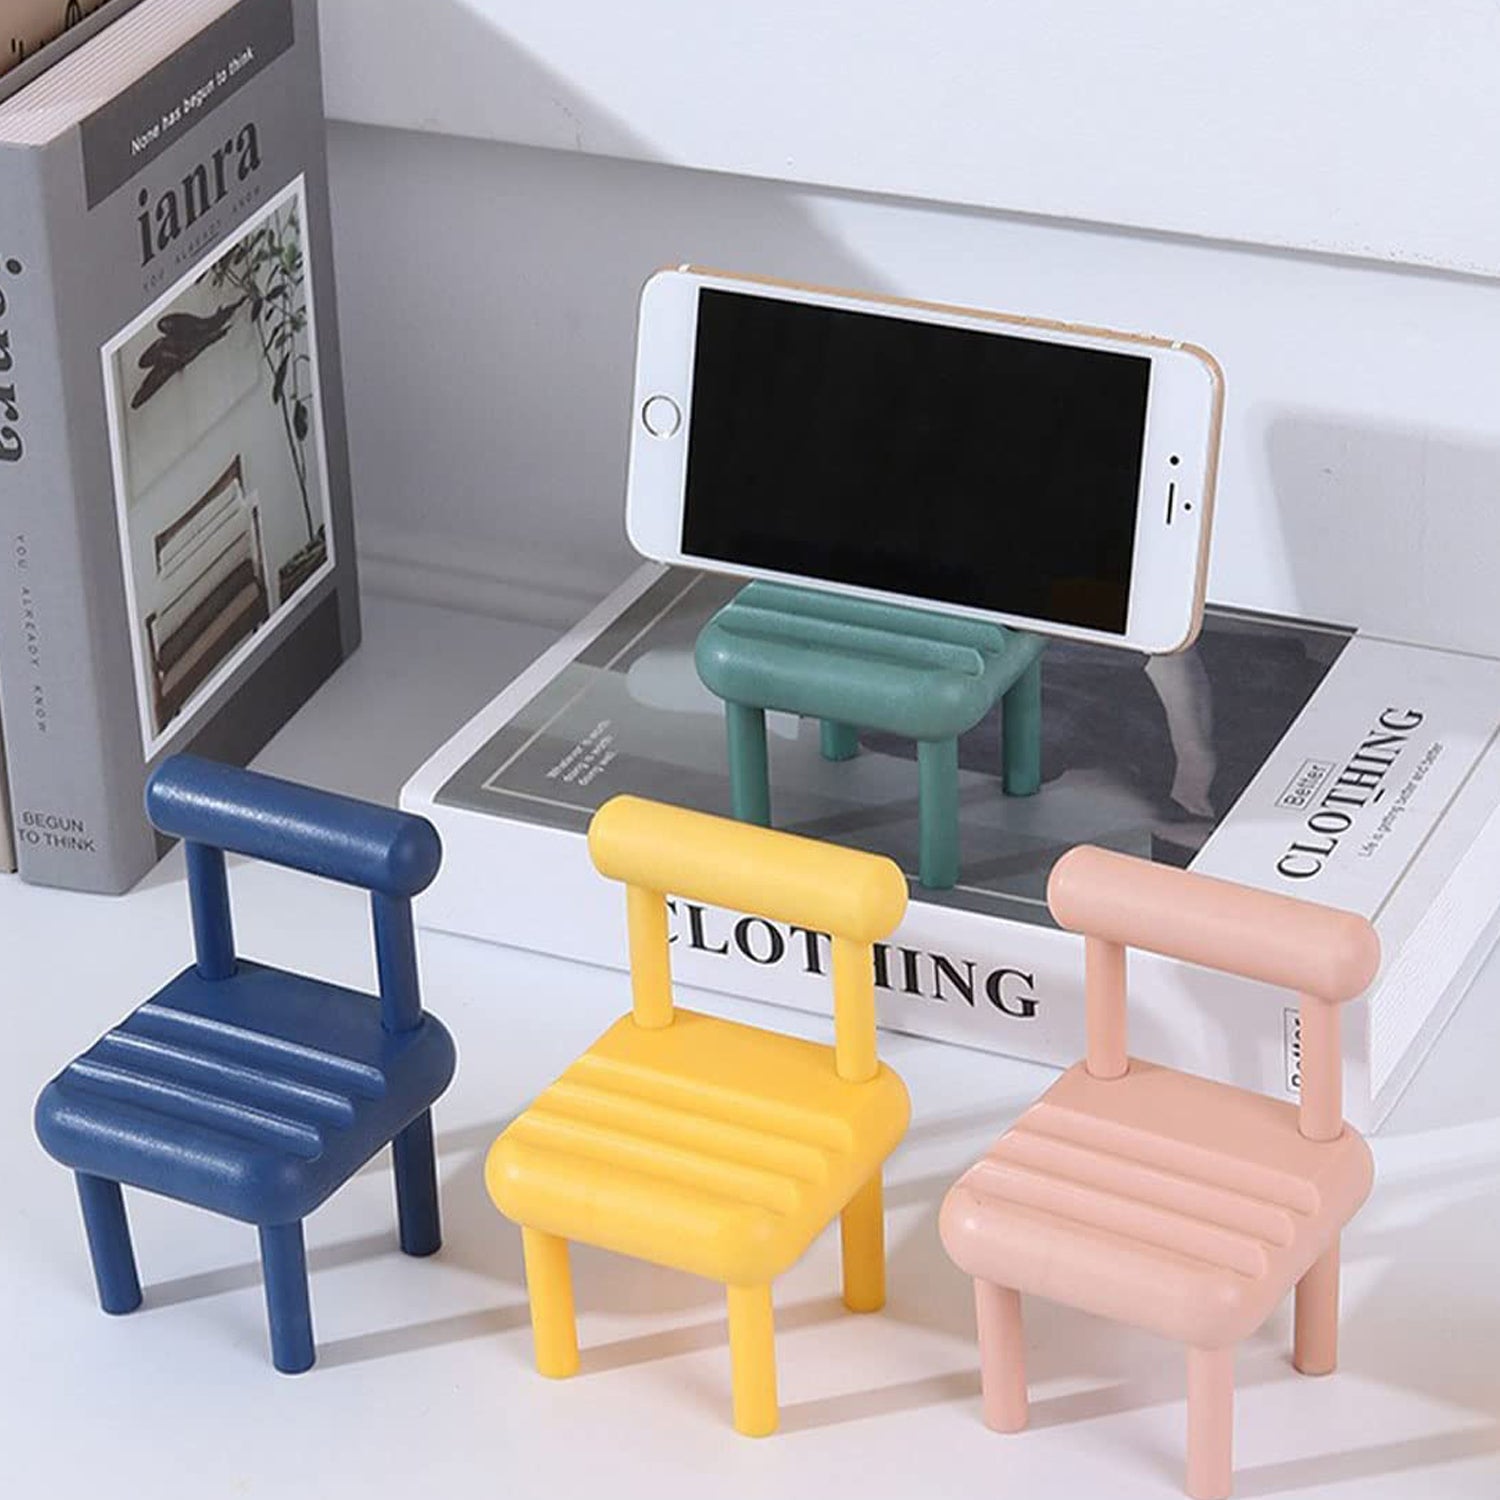 8886 Mobile Phone Holder, Mini Chair Cell Phone Stand, Portable Smartphone Dock, Cellphone Holder for Desktop Design Compatible with All Mobile Phones (1 Pc) - deal99.in